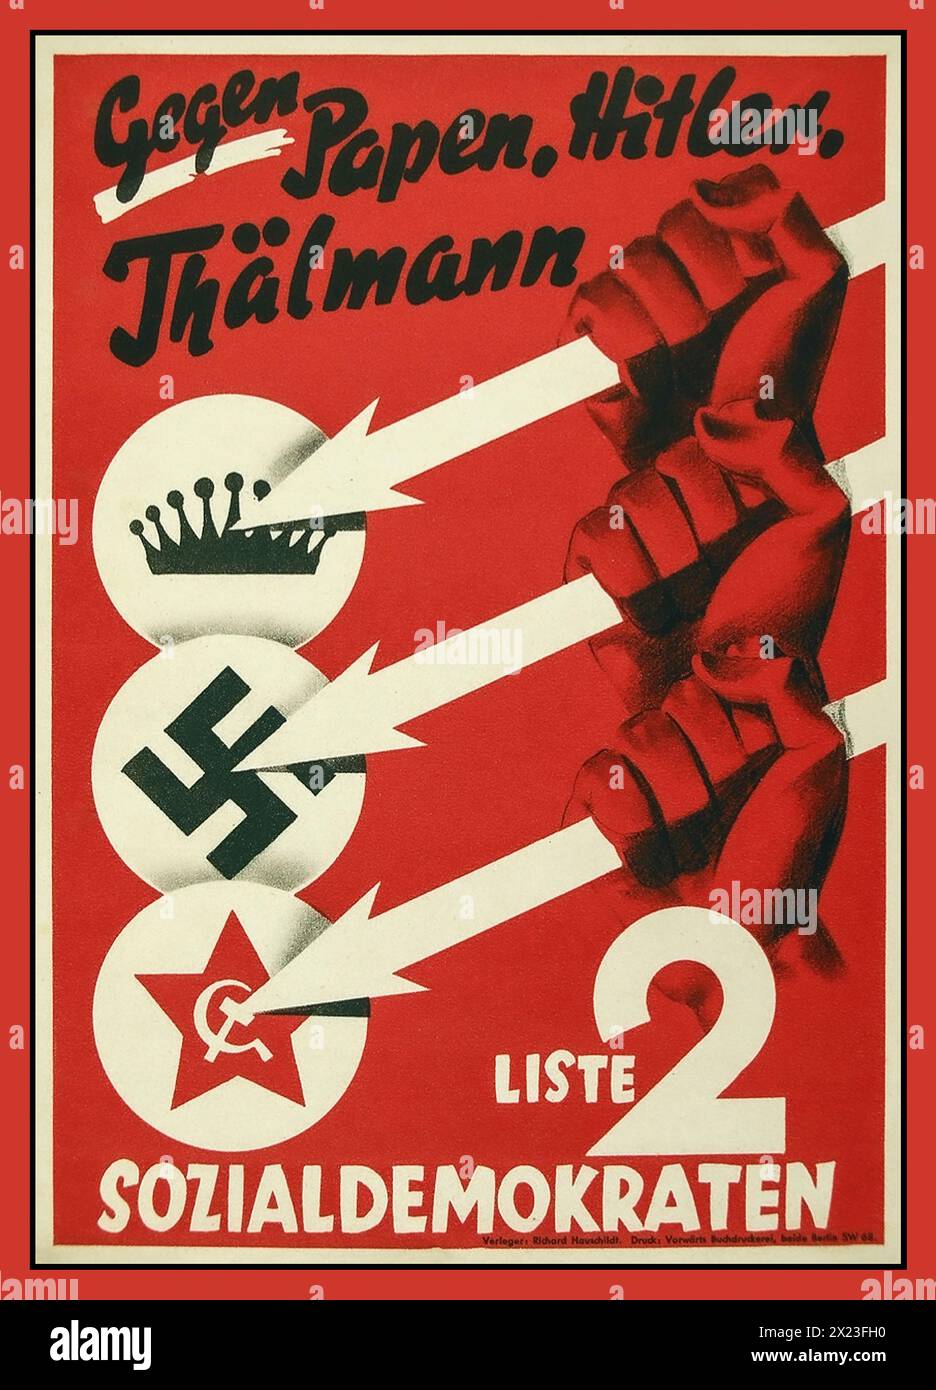 1932 Nazi Germany Elections 'Three Arrows' Election Poster for the Social Democratic Party of Germany  'GEGEN Papen, Hitler, Thalmann. Vintage 1930s Nazi Germany Poster 'SOZIALDEMOKRATEN' Stock Photo